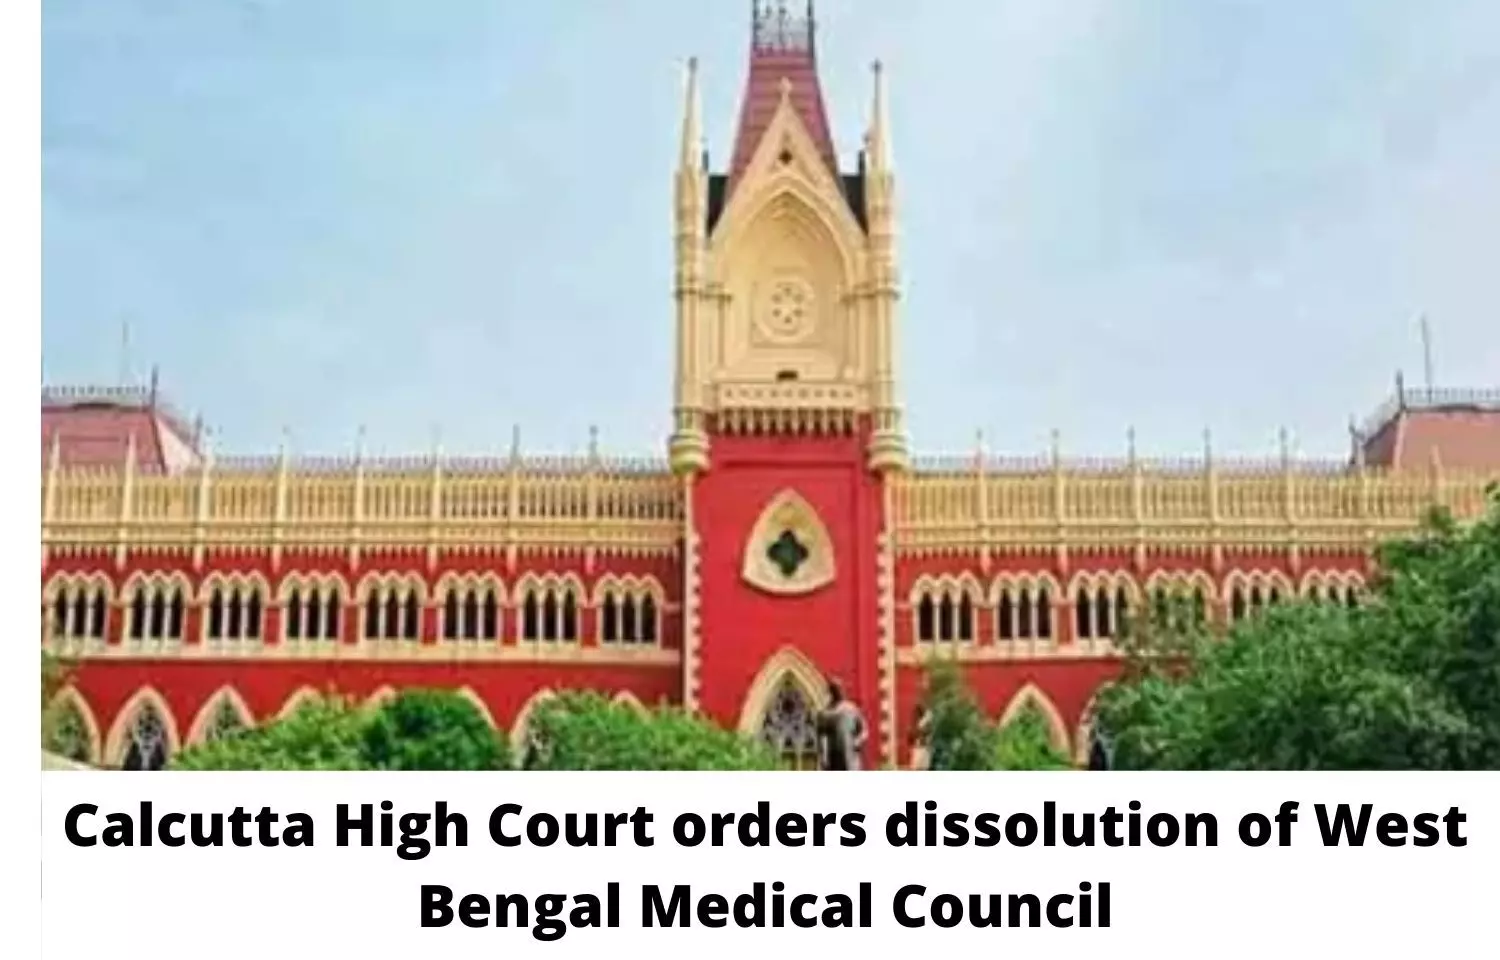 Calcutta High Court orders dissolution of West Bengal Medical Council